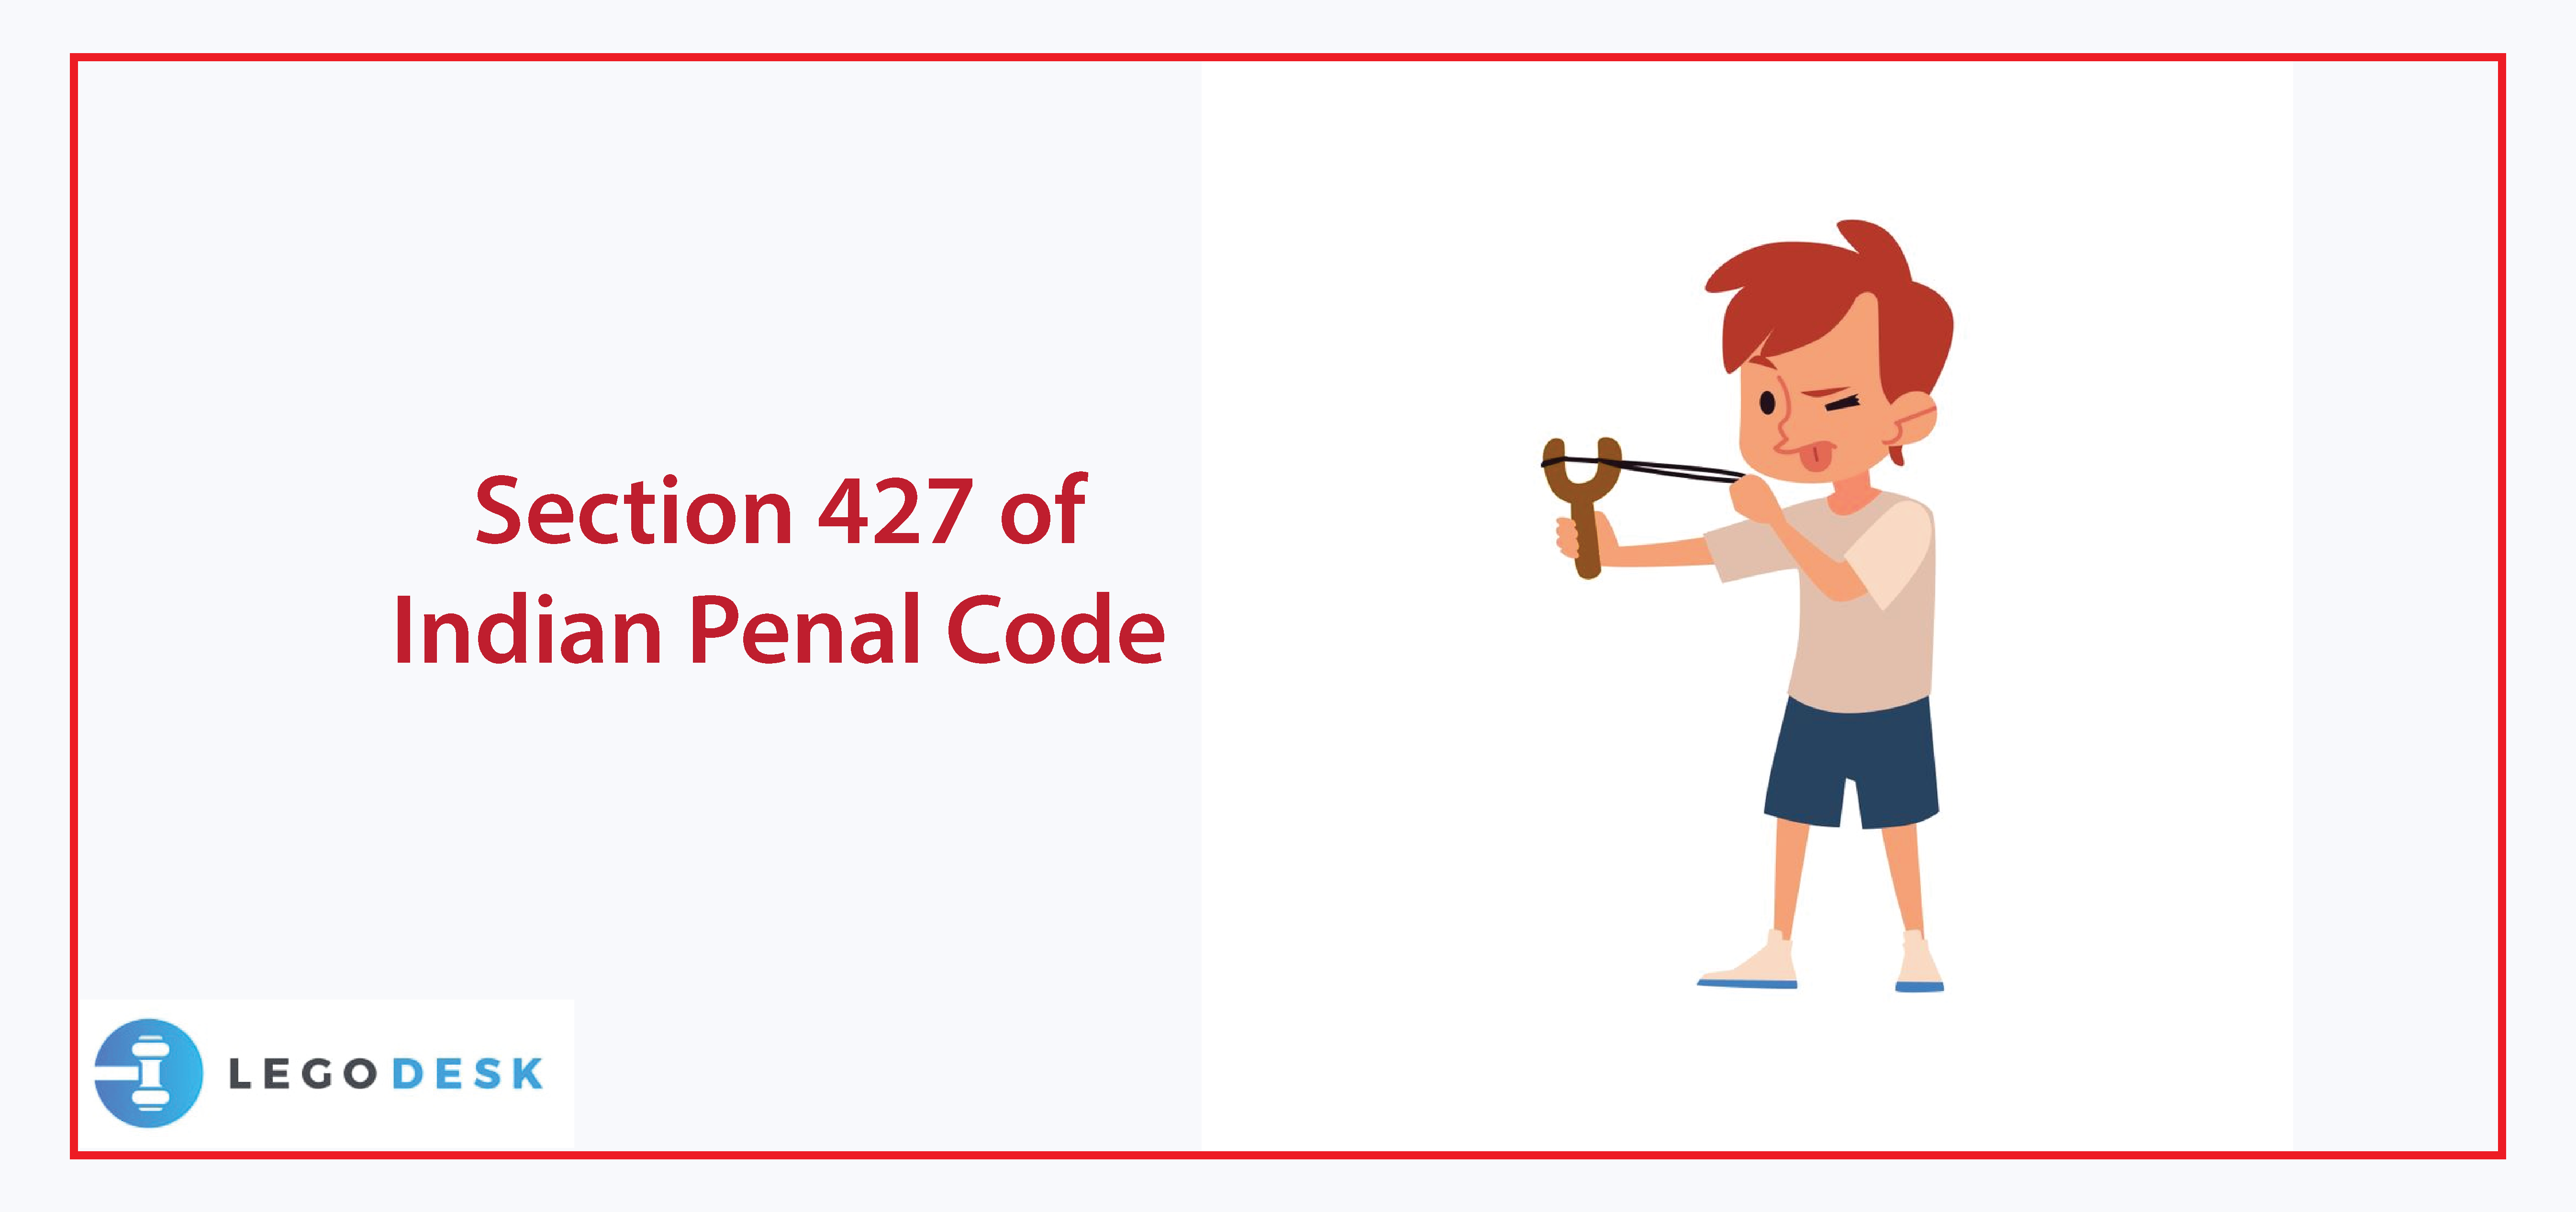 Section 427 of Indian Penal Code